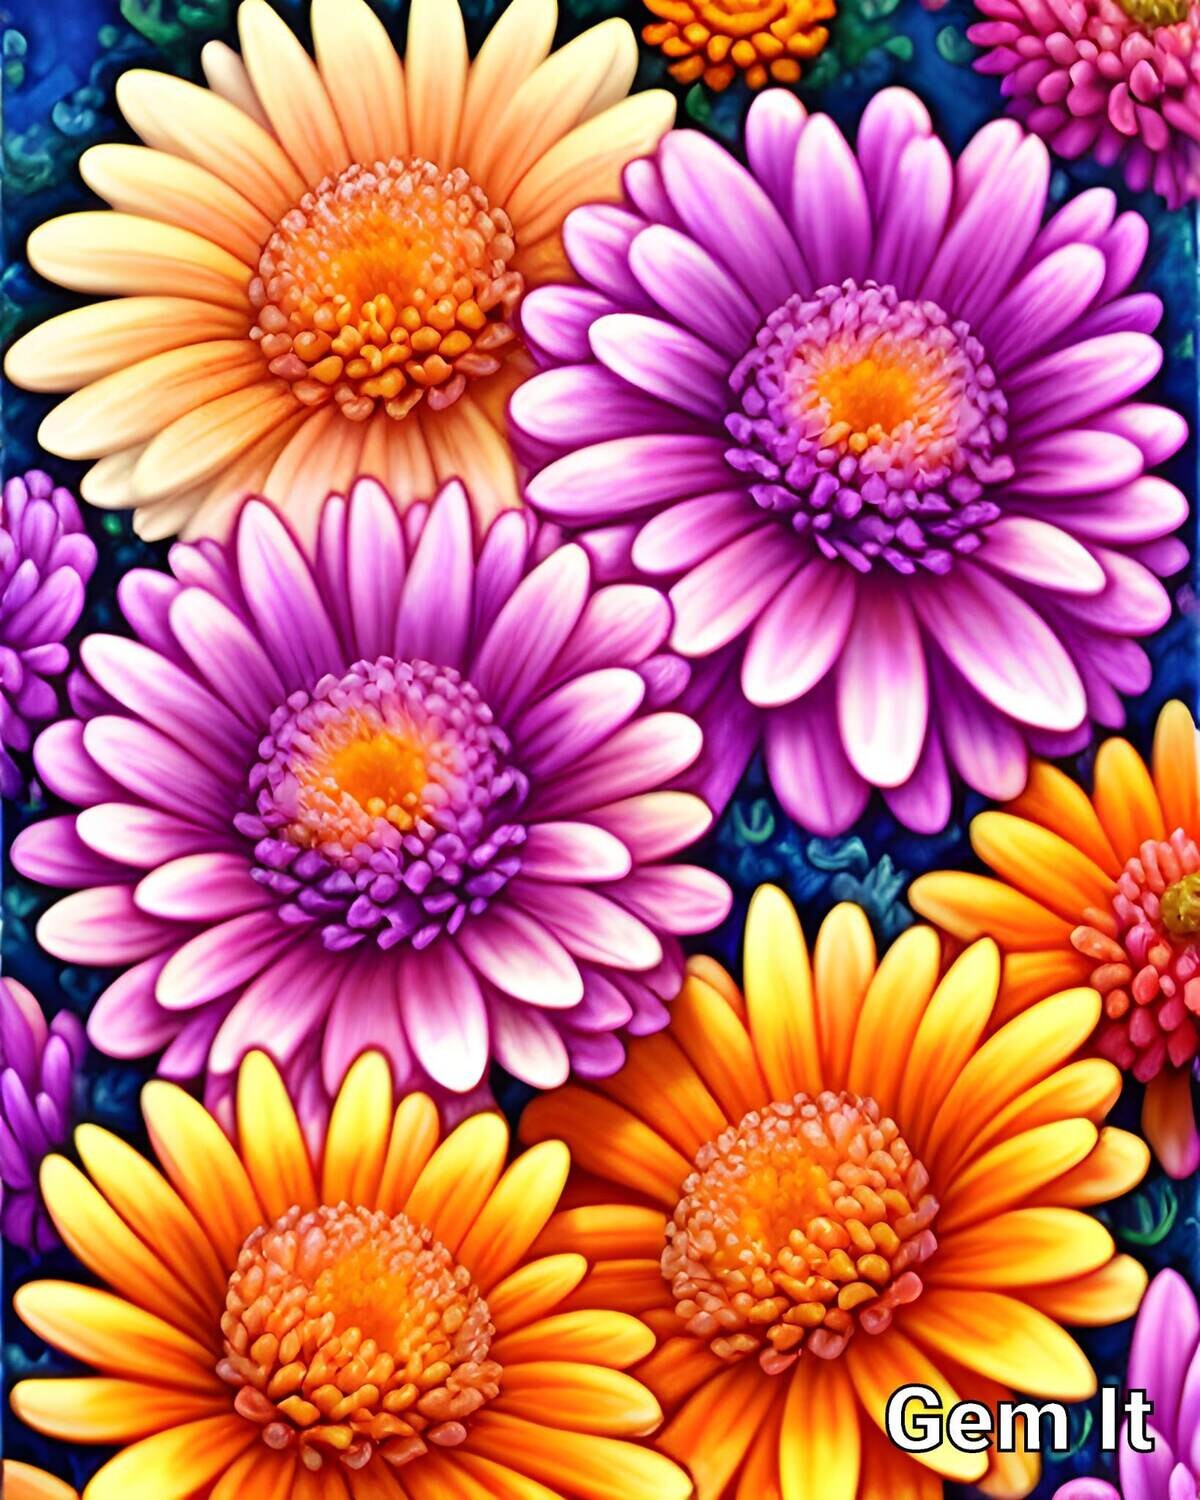 Chrysanthemums A - Specially ordered for you. Delivery is approximately 4 - 6 weeks.